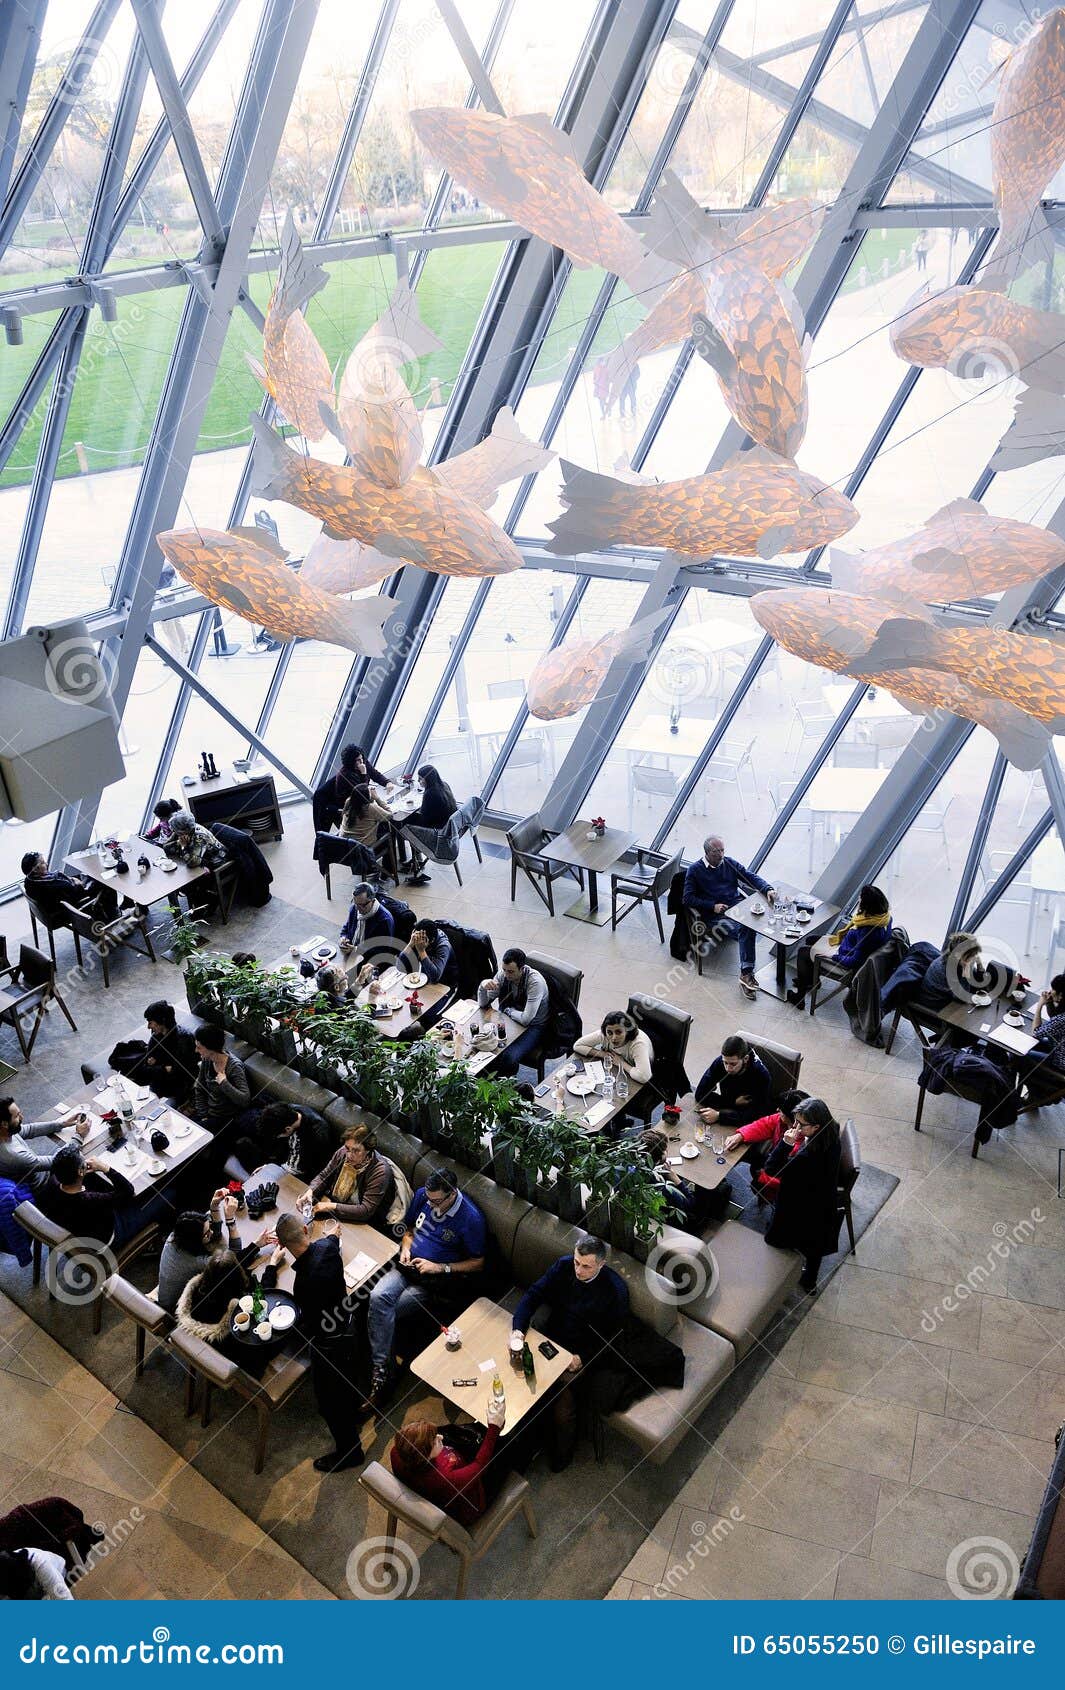 The Cafeteria Of The Modern Art Museum Of The Louis Vuitton Foundation Editorial Image - Image ...